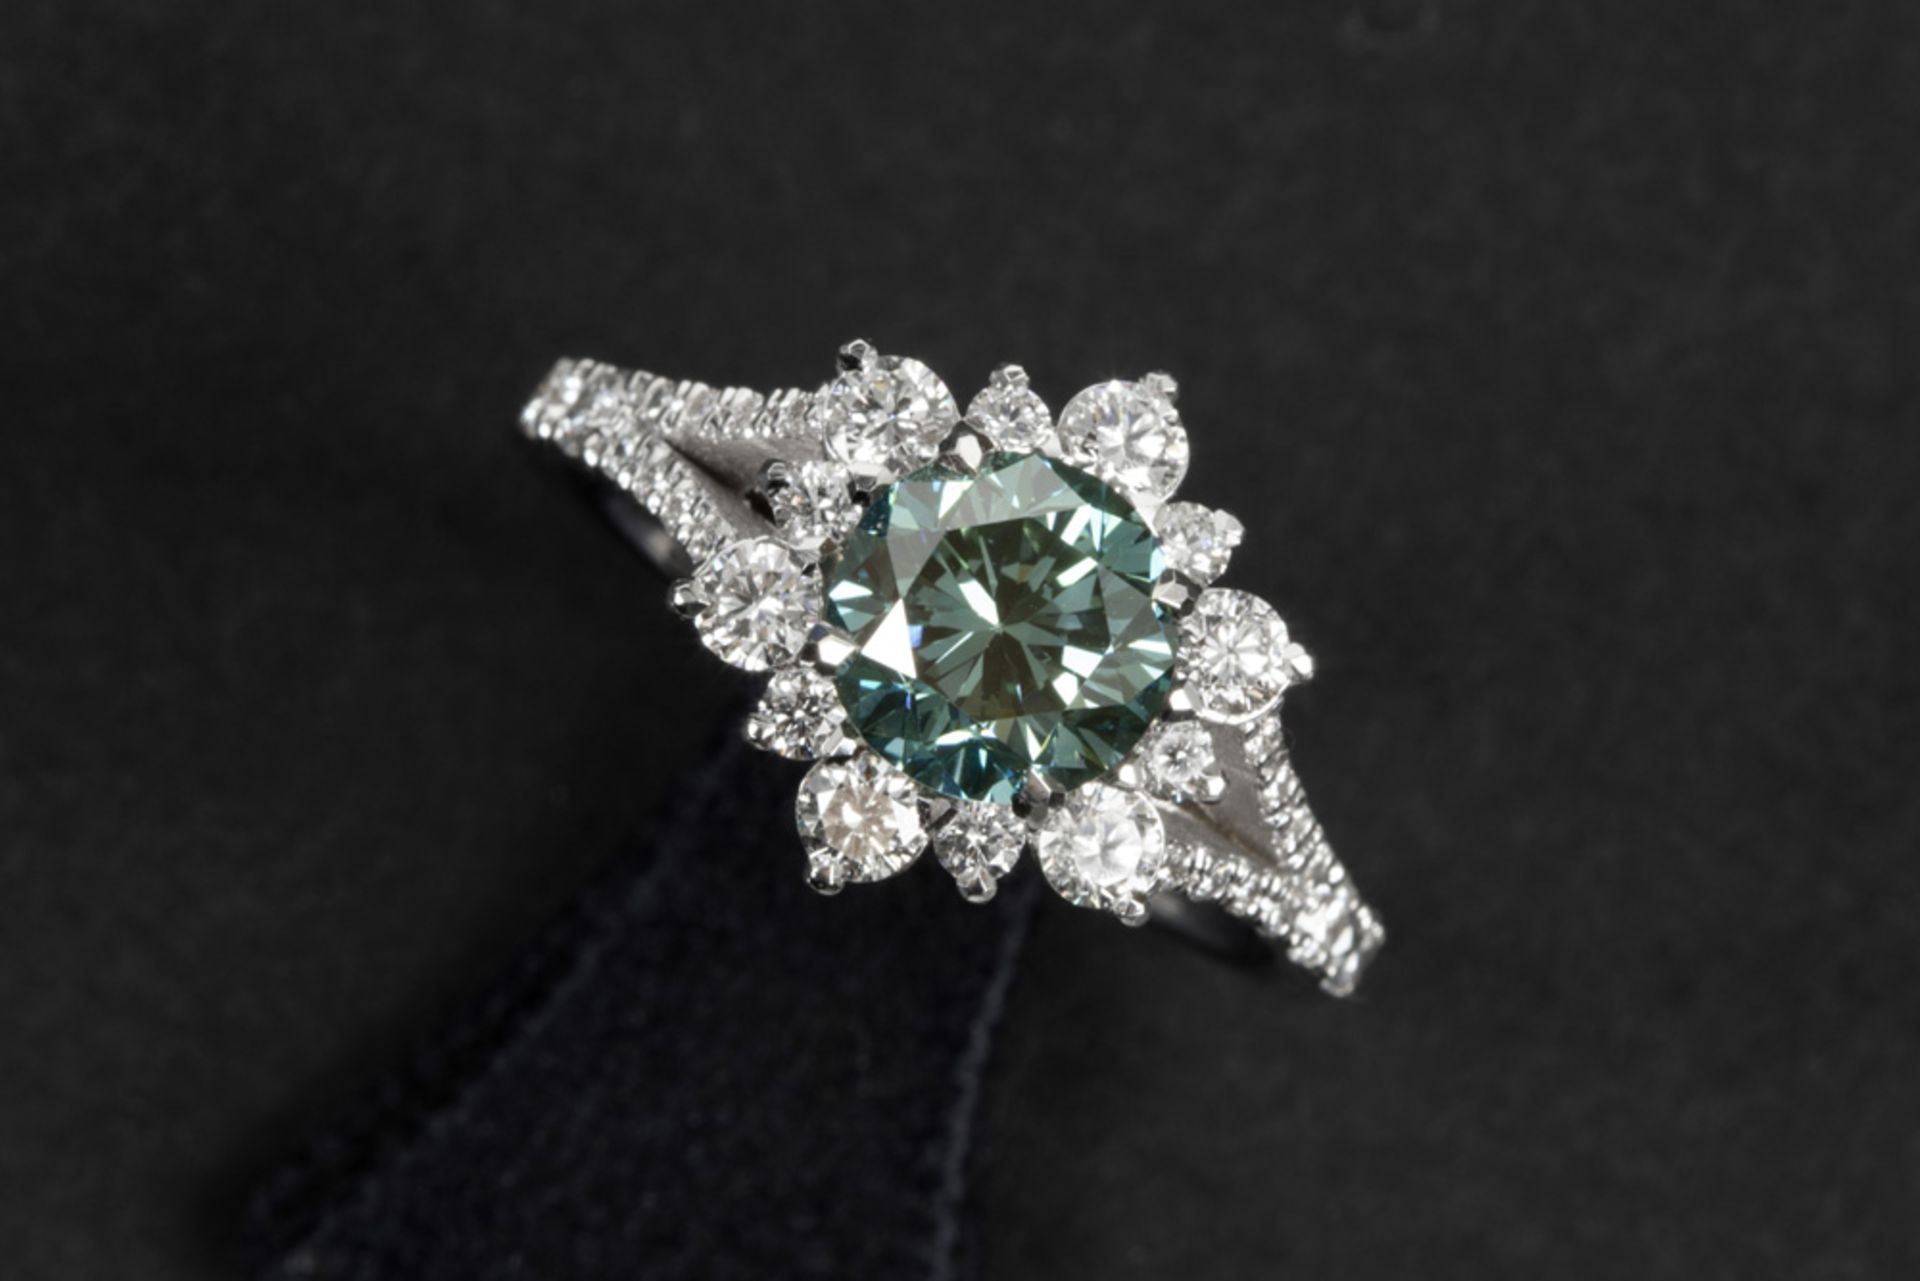 ring in white gold (18 carat) with a fancy blue/greenish brilliant cut CVD diamond of ca 1,50